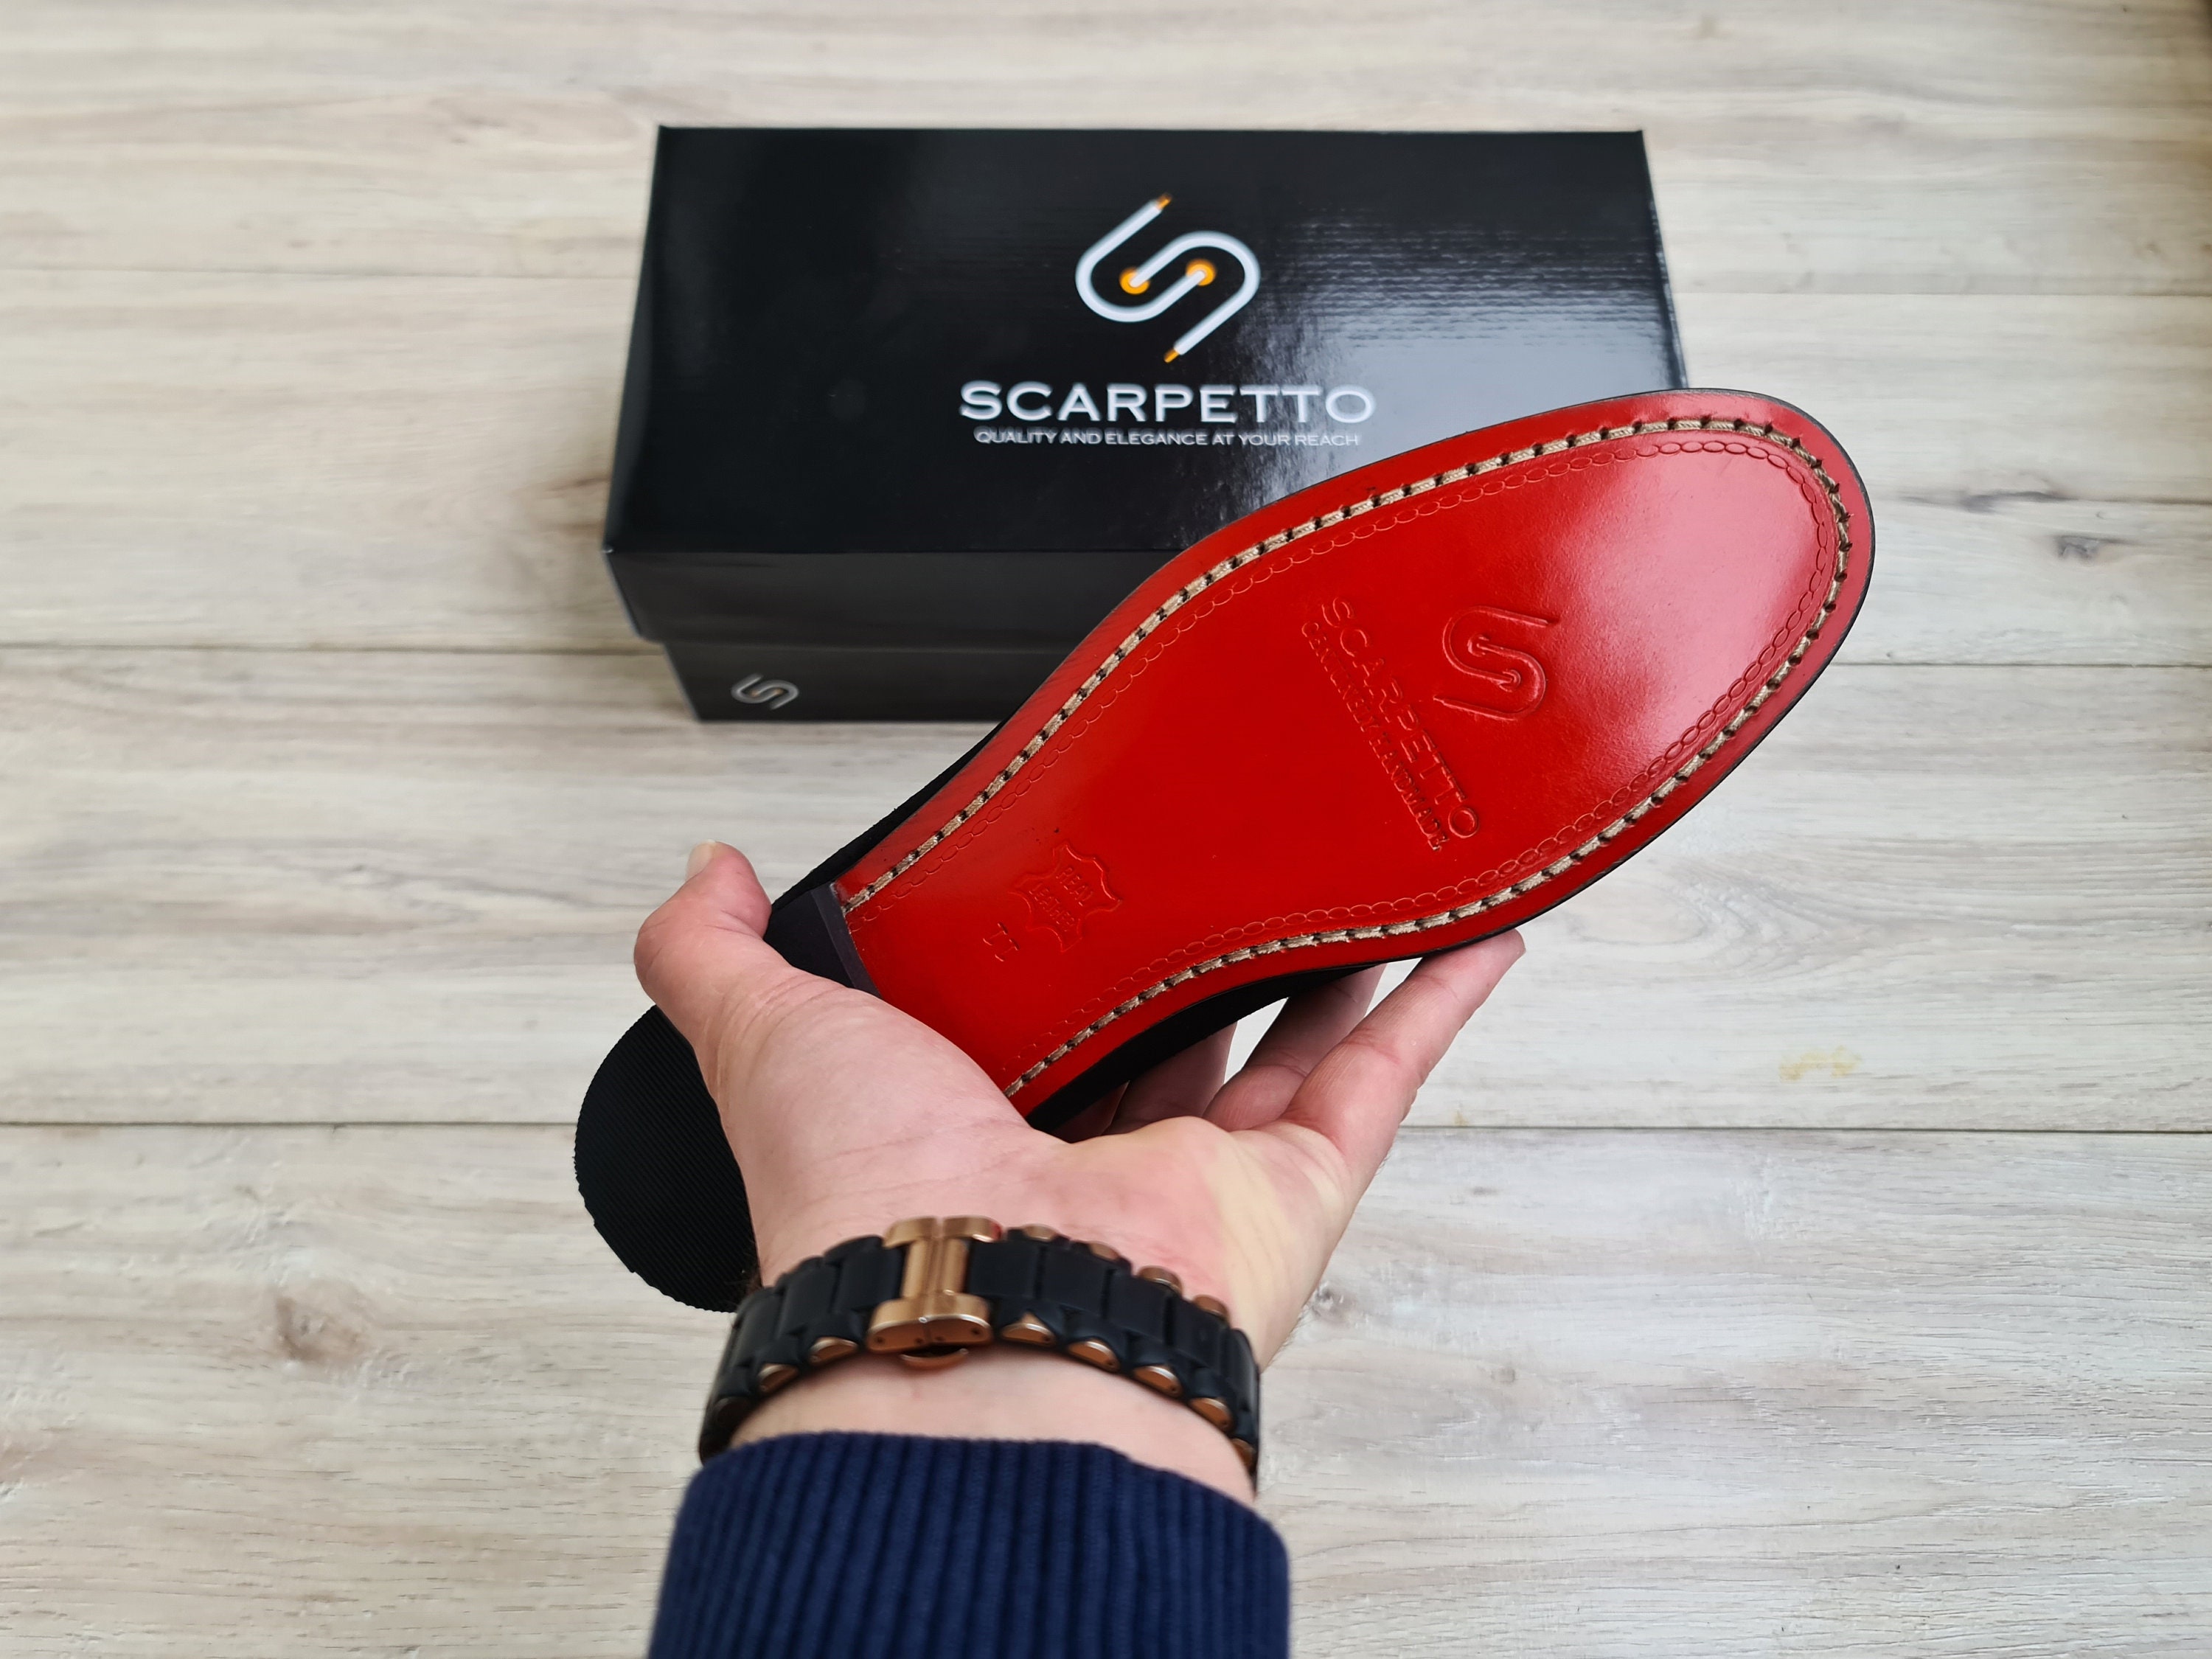 Premium Suede Leather Loafer With Red Sole Handmade Slip-on 